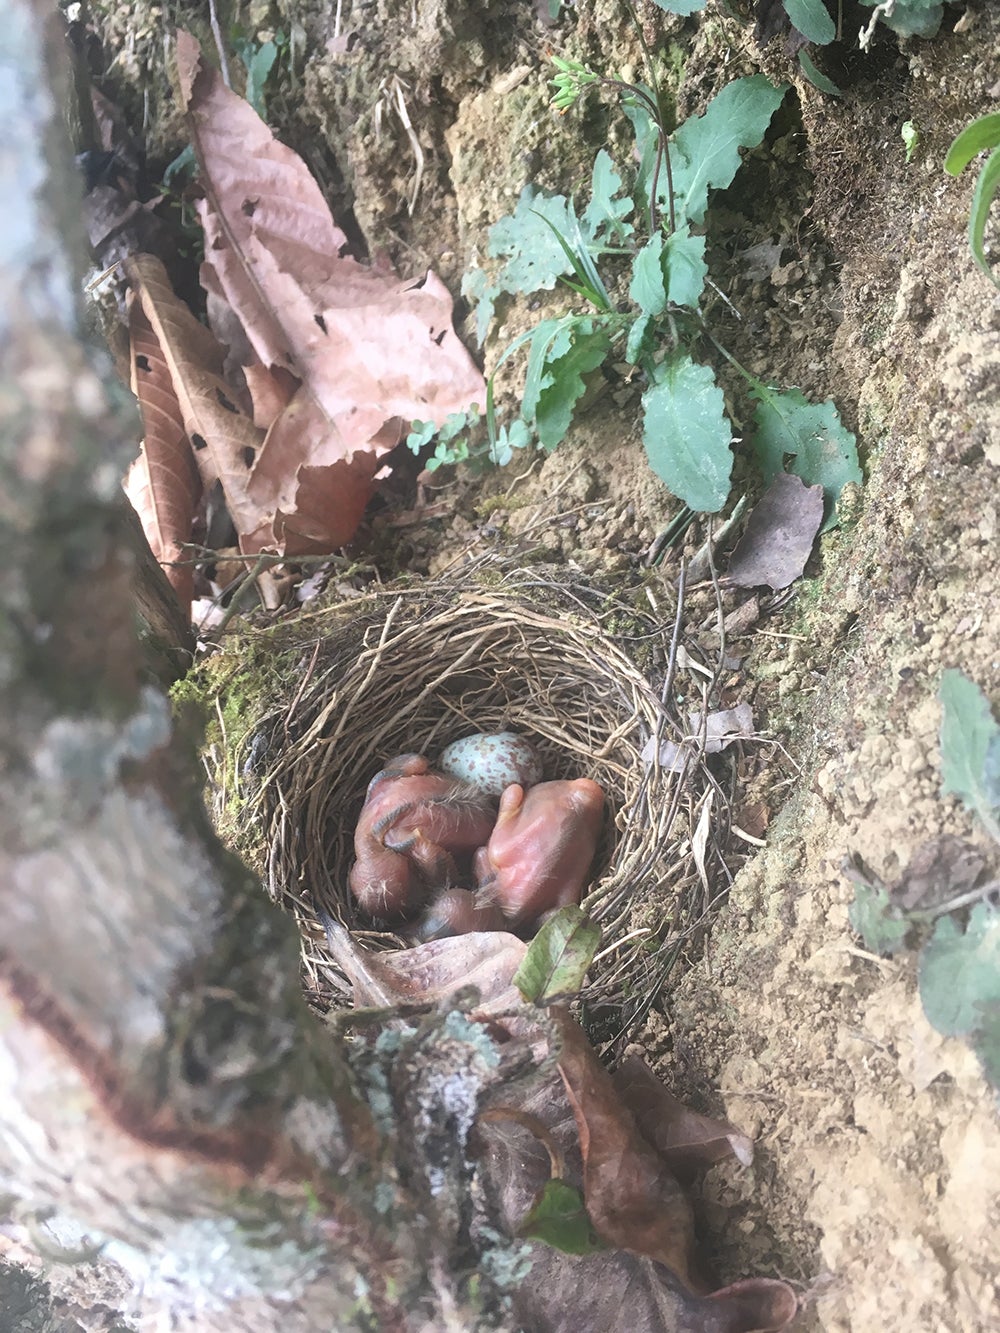 Two fledgling birds and an egg in a bird's nest